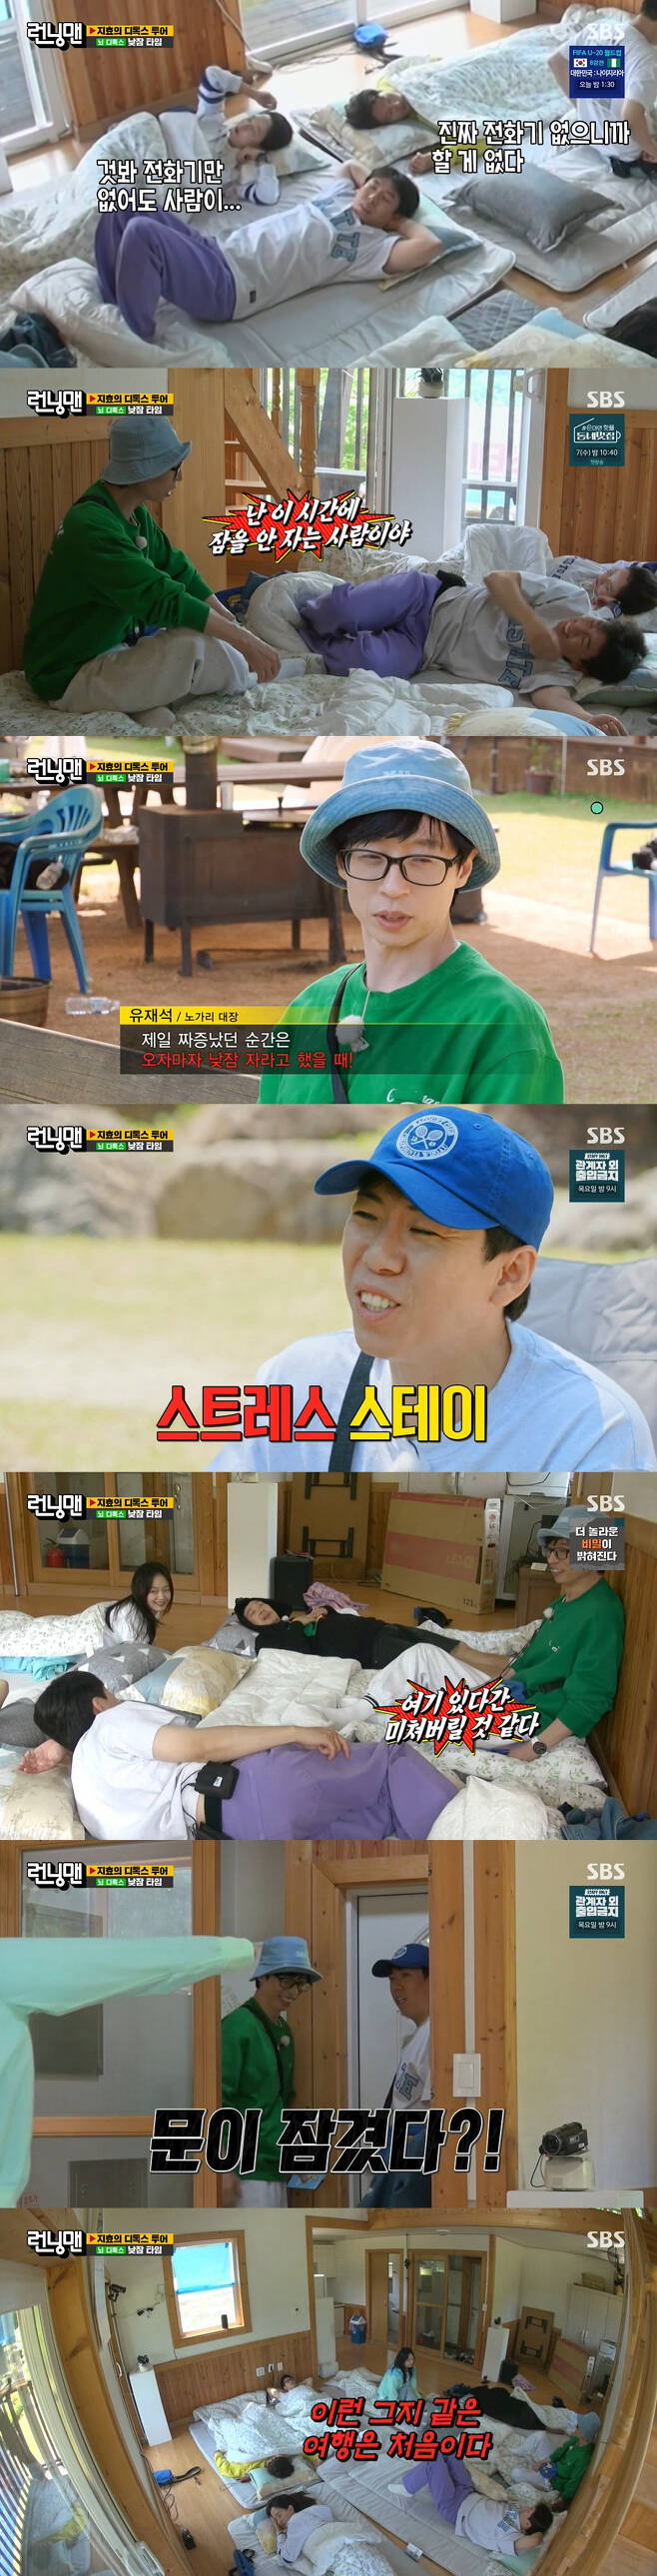 Running Man members complained about Song Ji-hyos detox tour.On the 4th, SBS Running Man left the summer vacation planned by Song Ji-hyo, the first runner, with the long-term project 2023 RunningTour Project prelude to members designing and traveling.Song Ji-hyo, who met the production crew on the day, said, The Jihyo Stay concept is a break, he said. Members are always holding cell phones.It is not too good for the network, the time to leave the body to nature, the natural way, he suggested detox tour .On the day of the trip, Song Ji-hyo first briefed the members on the Jihyo Stay schedule. The first schedule explained that Song Ji-hyo takes a nap in the brain detox, and the members responded, Can you afford it?When I arrived at the hostel, I told them to return the cell phone to cut off the world, saying, I can not use my cell phone. I returned it and talked on the radio, but eventually the members turned off the radio and laughed.Yoo Jae-suk said, I will go shopping instead of taking a nap. I am a person who does not sleep at this time. Why do you sleep?Yang Se-chan said, It was nice to have a warm floor. Jong-kook lied down, and Jihyo lied down. But Jae-suk didnt sleep. He kept talking, adding, This trip is like a stress stay.Yoo Jae-Suk said, The most annoying moment was when I told him to take a nap as soon as I got here. I think Im going to go crazy here. He eventually escaped Yang Se-chan.Ji Suk-jin said, This is the first time I have traveled like Model Behavior, and Yoo Jae-Suk also said, This is the first time I have traveled like Model Behavior.Song Ji-hyo laughed at the death note by writing Ji Suk-jins name.The next schedule is detox in the body, and Yoo Jae-suk, Ji Suk-jin, and Song Ji-hyo, who did not do well with the brain detox chosen by Song Ji-hyo because they could not be delivered, went out to pack Suzzana: Buried Alive herbs.At that time, Haha asked Yang Se-chan, Have you ever been on a trip with your girlfriend? Yang Se-chan said, Ive been there before. Ive been abroad, and Ive been home.Haha then mentioned his blindness, and Yang Se-chan, who was upset, laughed, Are you saying something like that?Haha said, Did not you feel uncomfortable to find out? Yang Se-chan laughed, saying, It was just fine.Arriving at the restaurant, the three people ordered chestnut pancakes and acorn jelly while Suzzana: Buried Alive herb bibimbap was being wrapped, saying, Its so delicious.The three of them tasted a little bit of it, packed it for other members, and headed to the hostel. The members all tasted Suzzana: Buried Alive Bibimbap and admired the taste, saying, It is so delicious. Nature came into work.At that time, Song Ji-hyo turned to MC Song and proceeded to a water game where he had to find an empty bag in a water bag.Therefore, the members not only immersed themselves in the heat and stress in the water rush, but also made the scene into a laughing sea by unfolding an unusual psychological fight.The last schedule was mind detox, and members expressed their feelings on the trip. At that time, Park Sang-hee, director of the Mental Health Research Institute, revealed the results of watching the behavior of the day closely from the picture.Park Sang-hee said, Se-chans paintings show boldness. The waves are strong in expressing unconsciousness. I feel peaceful, but there is a slight fluctuation in my mind. When I draw a person small, there may be a sense of intimidation.It is likely to be cute and bright, but there may be atrophy. Park Sang-hee said, Green, yellow, and blue are the colors that feel stable. Three colors are at the center.I feel a sense of security and feel a sense of healing, he said. There is a possibility that I have revealed that I have to connect to the broadcast while enjoying nature.Kim Jong-kook, who portrayed the camera bishop. Park Sang-hee said, Kim Jong-kooks picture shows defense.I do not think he is comfortable expressing himself, he said. I think everyone is aware of it as a team, he said of Song Ji-hyo, who portrayed the morning greetings with the staff.Haha and Jeon So-min, who had the most impressive scenes on the day, were the same in material and composition. Haha and Jeon So-min, who are similar in MBTI and personality, often fight. Why do I overlap with him?The two of you are more important than the scenery, said Park Sang-hee. Mr. Haha emphasized only Mr. Haha and Mr. Jeon So-min.